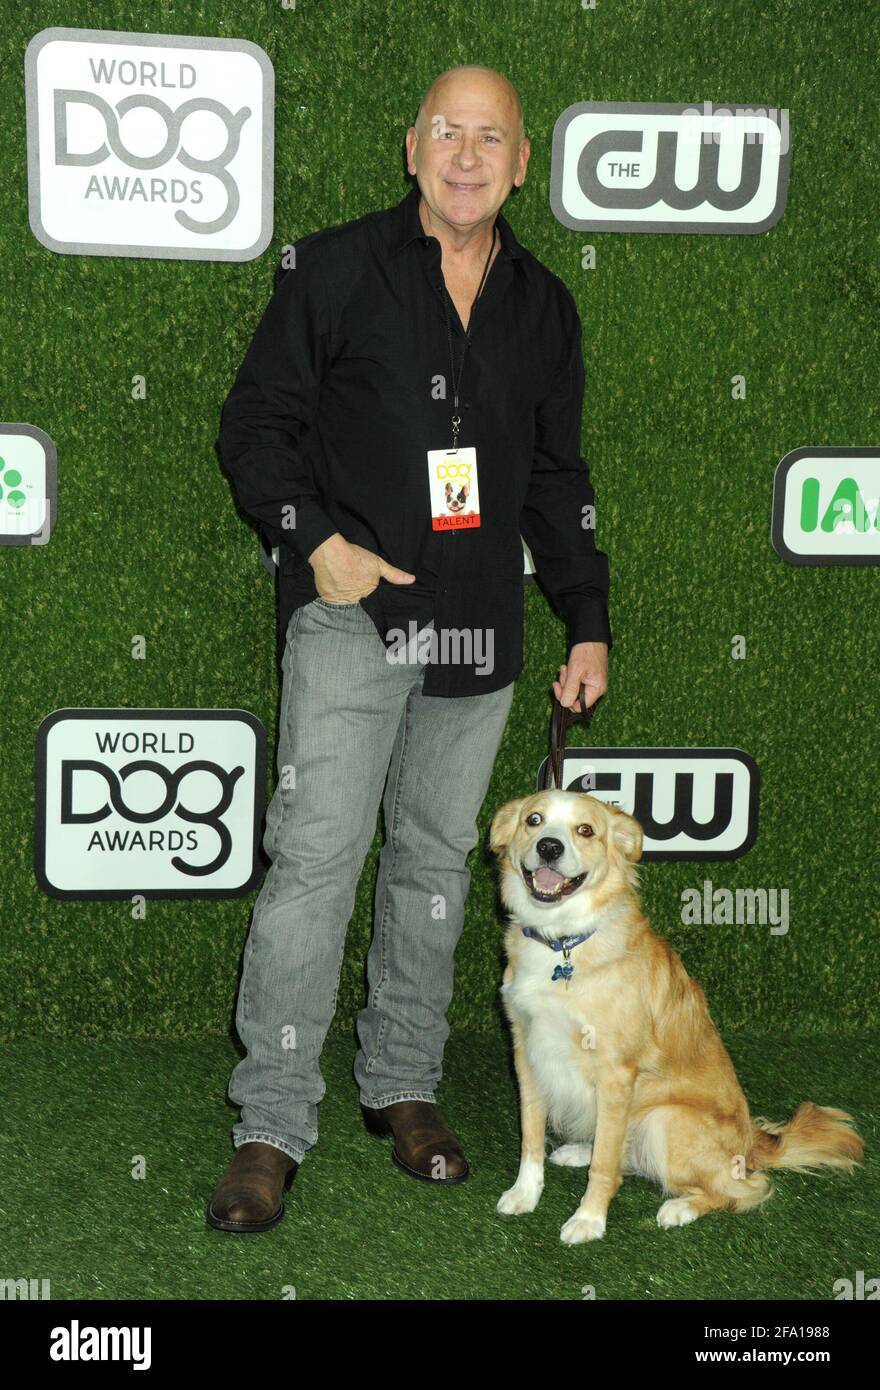 Chase Commercial Dog Duchess on the green carpet during the 2016 World Dog Awards, held at Barker Hanger in Santa Monica, California, Saturday, January 9, 2016.  Photo by Jennifer Graylock-Graylock.com 917-519-7666 Stock Photo